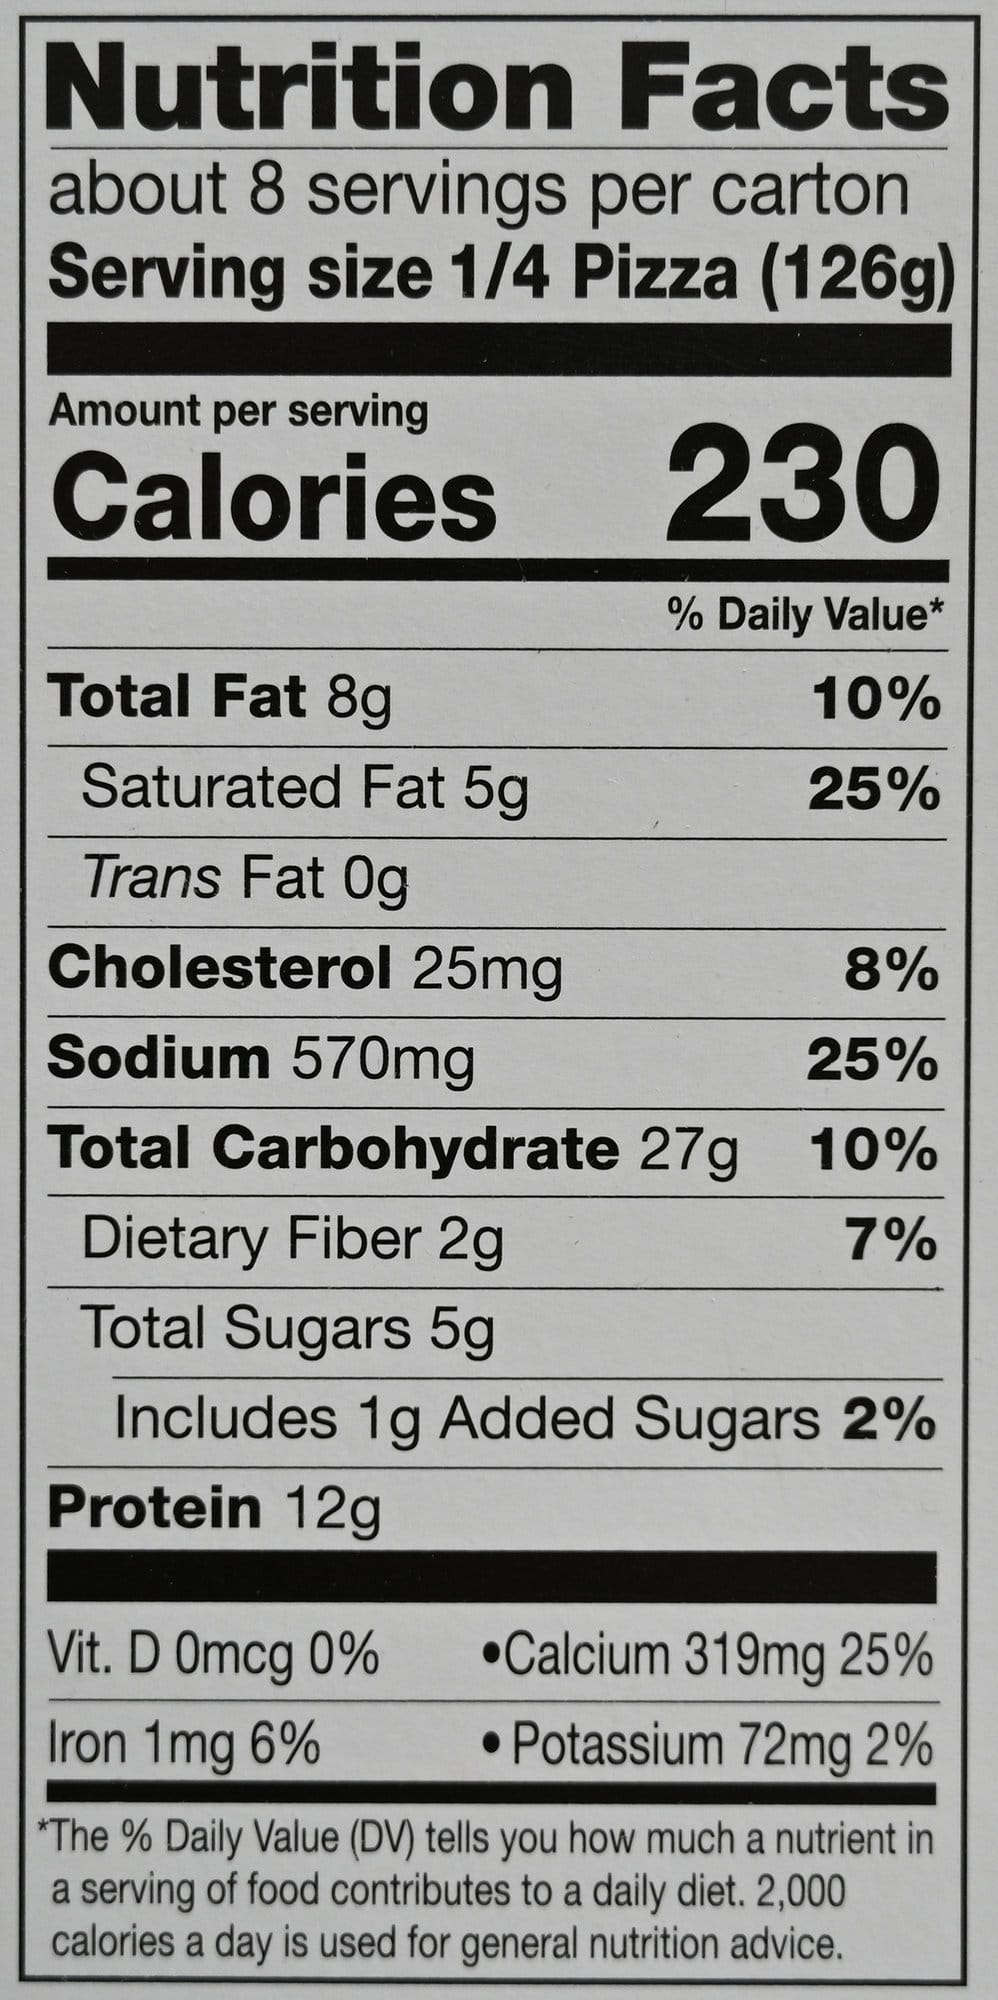 Image of the nutrition facts for the pizza.